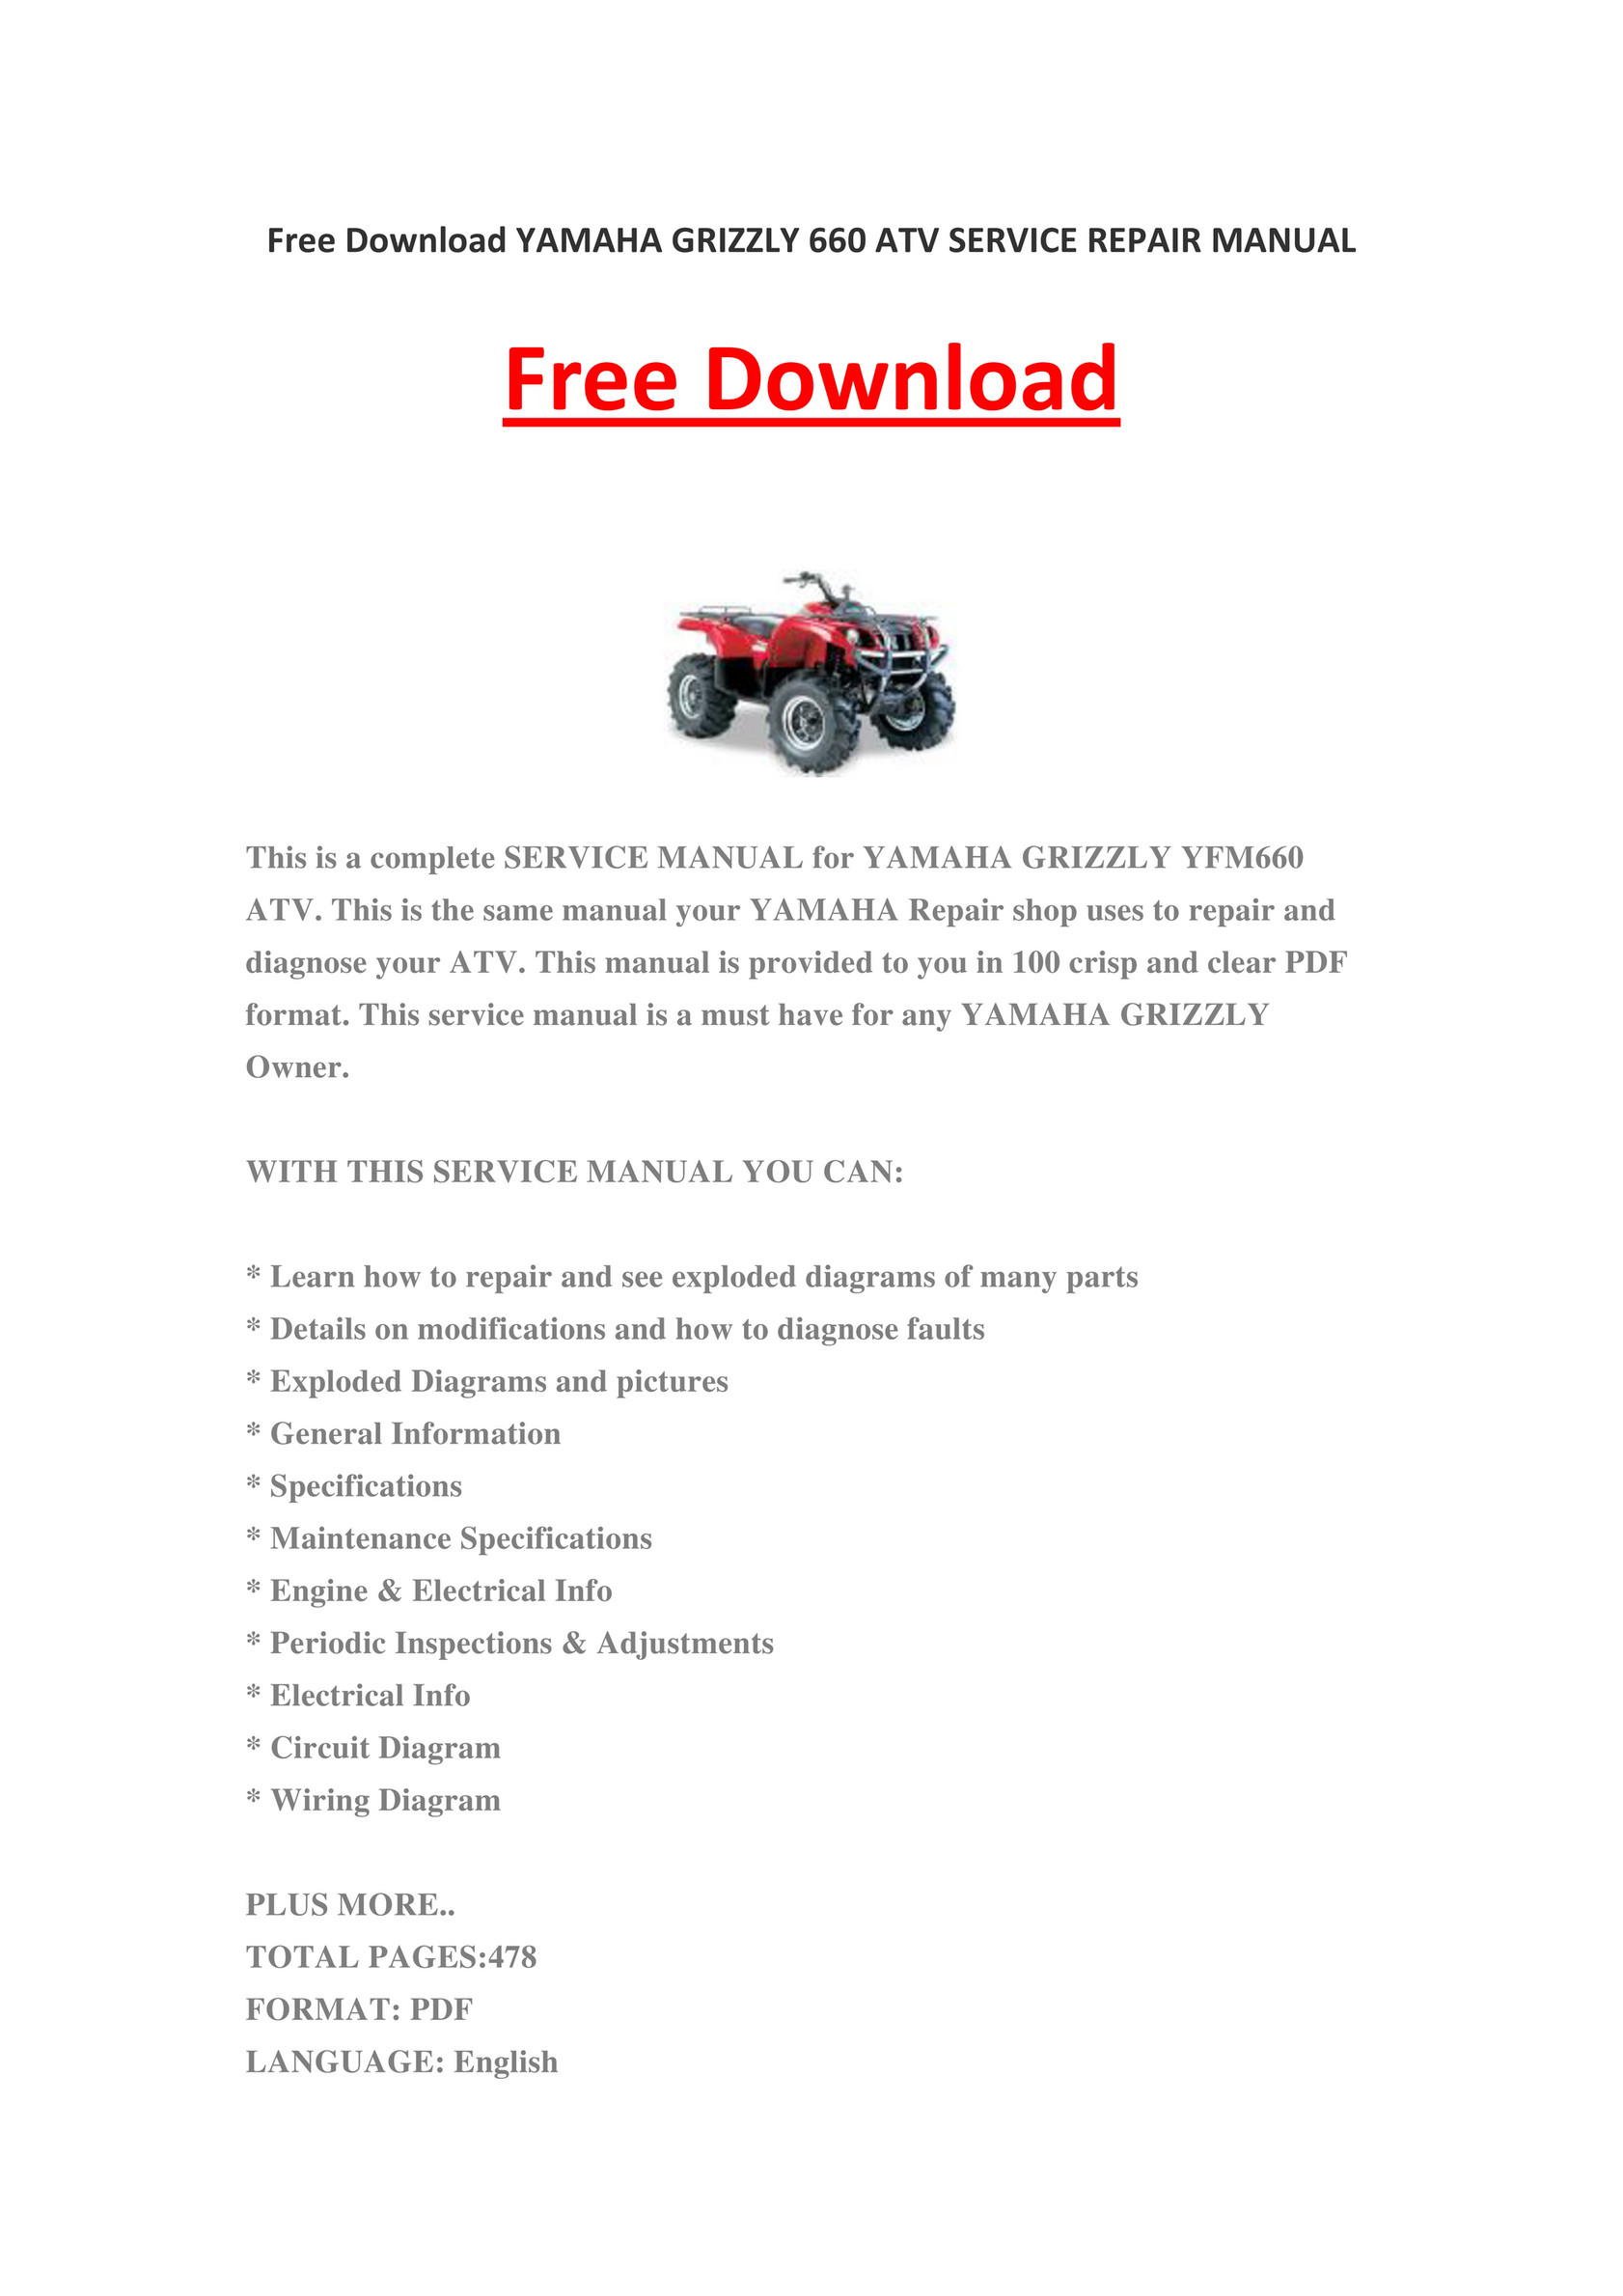 My Publications Yamaha Grizzly 660 Atv Service Repair Manual Page 1 Created With Publitas Com